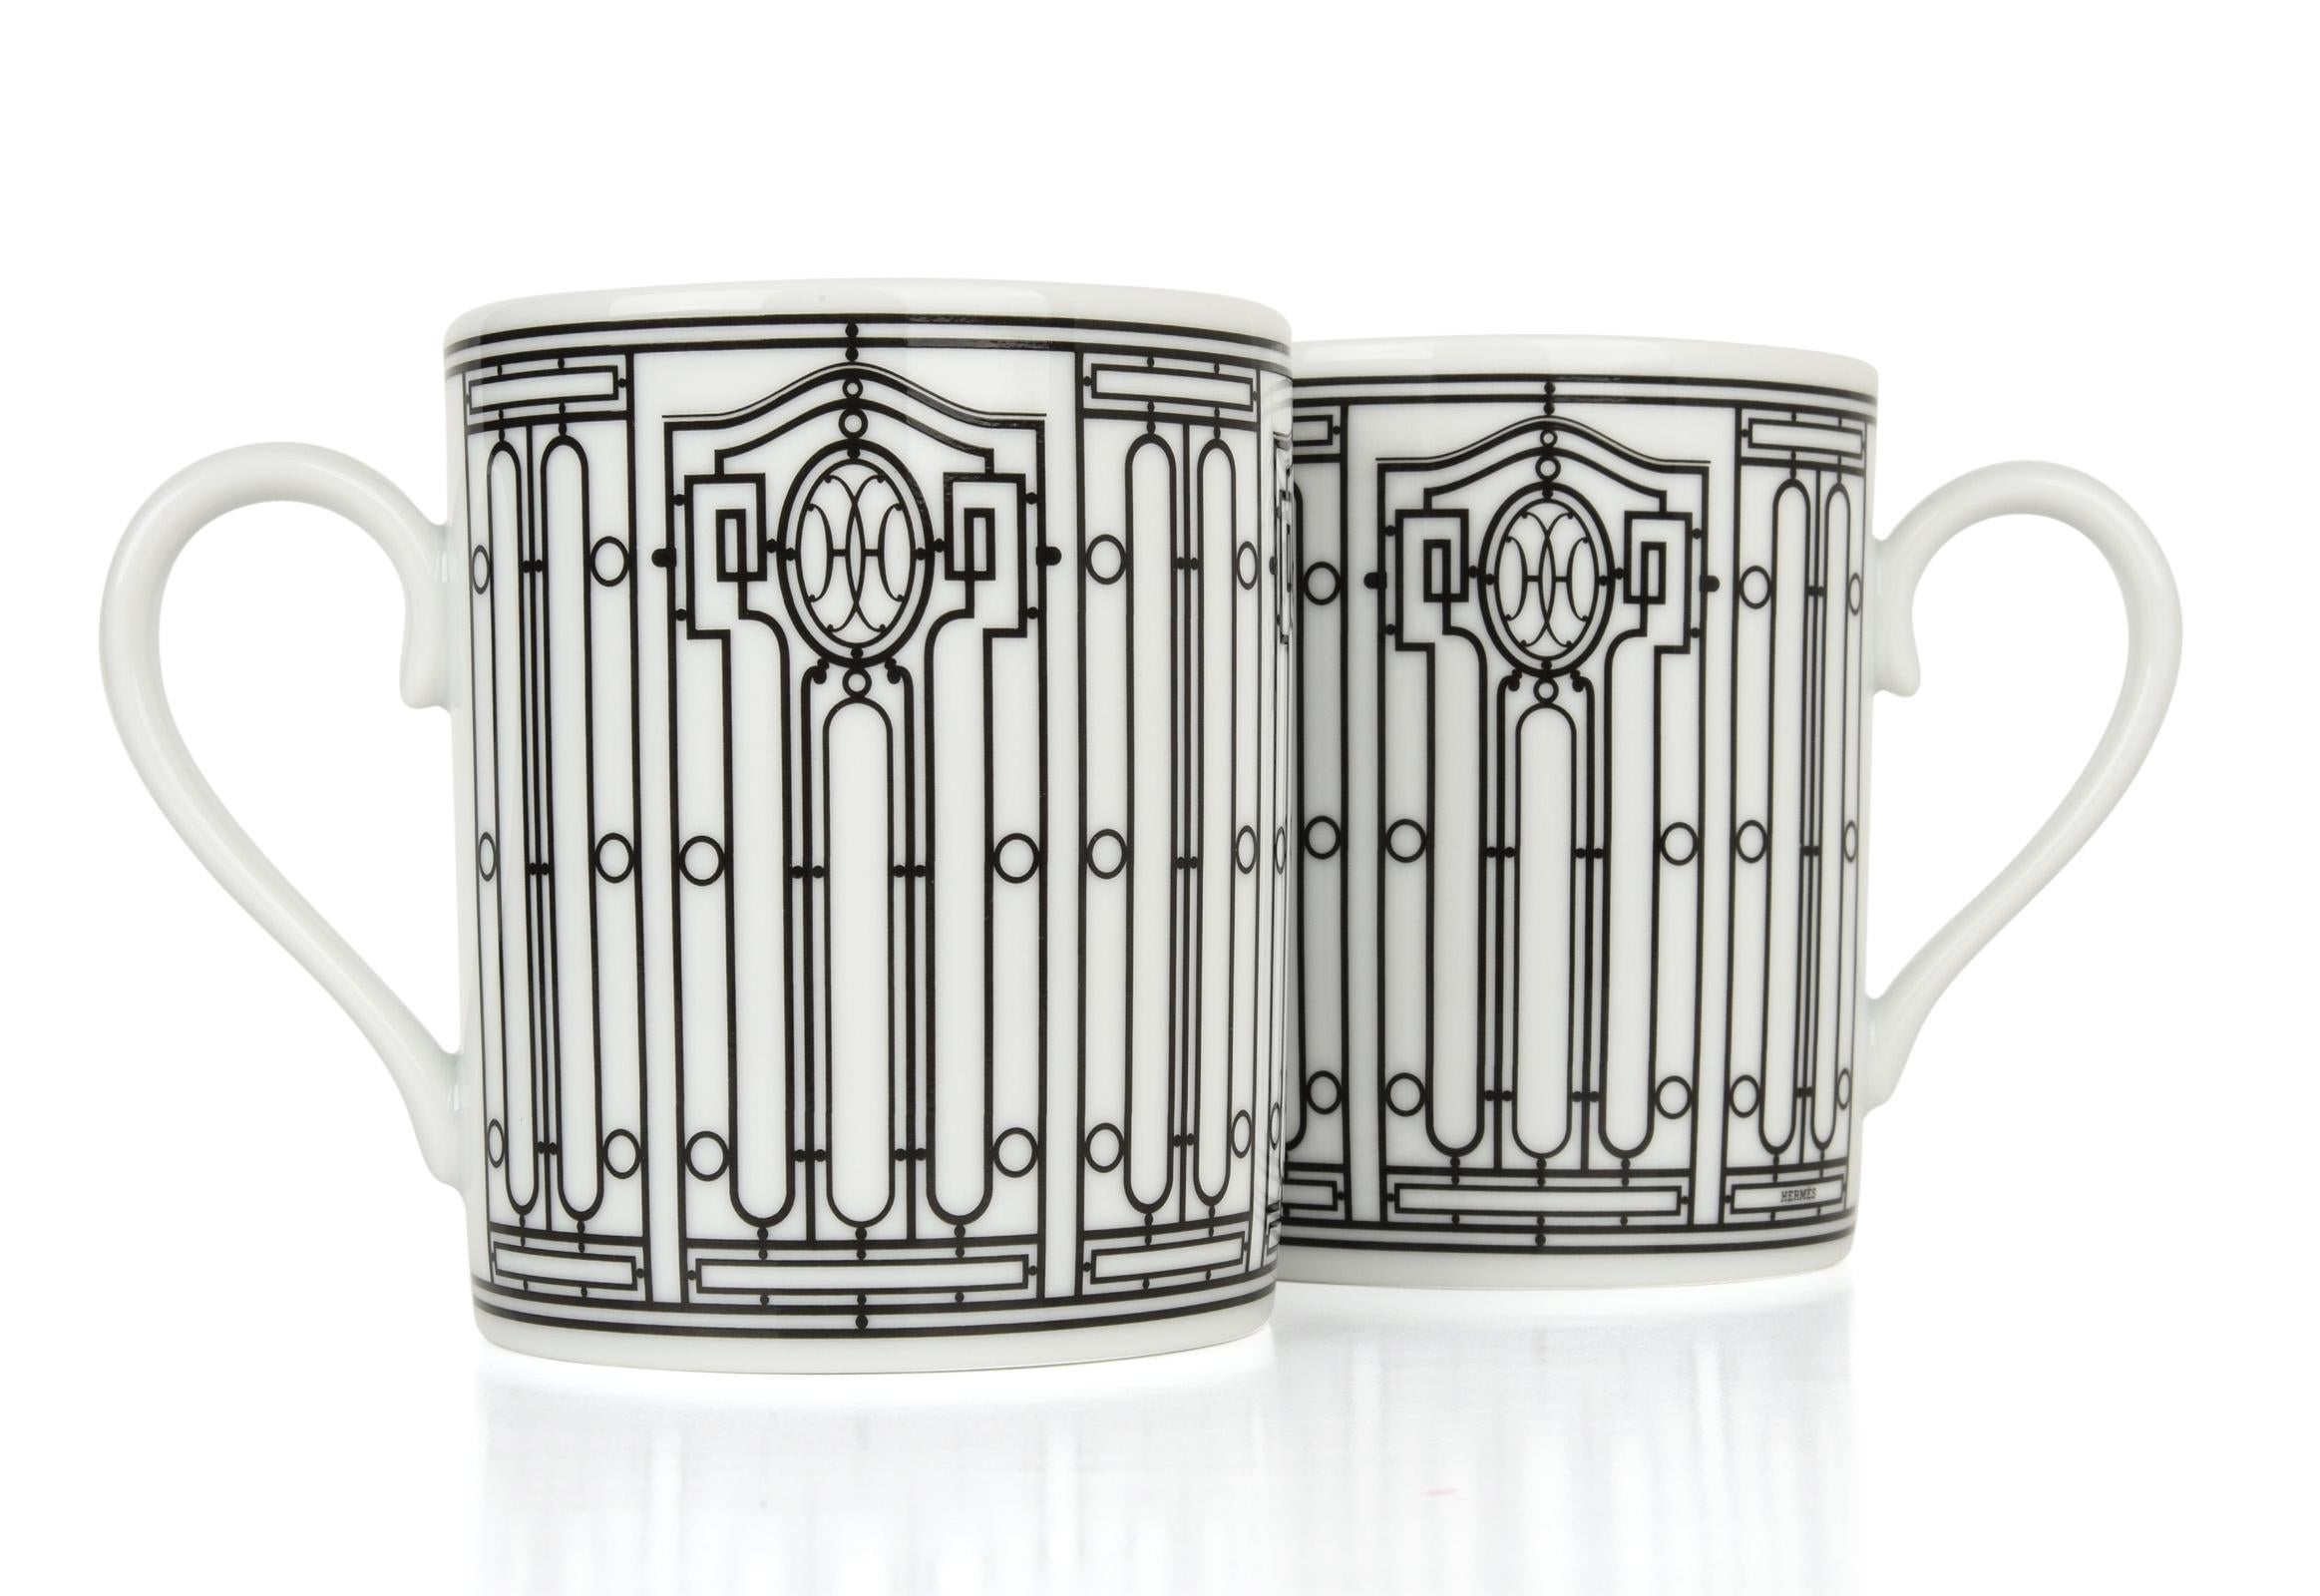 Guaranteed authentic set of two (2) Hermes H Deco mugs featured in white with black.
Features Art Deco wrought-iron friezes.
Each 10 oz mug is porcelain.
All are Deco themed in design.
Each mug comes with signature Hermes box and ribbon.
NEW or